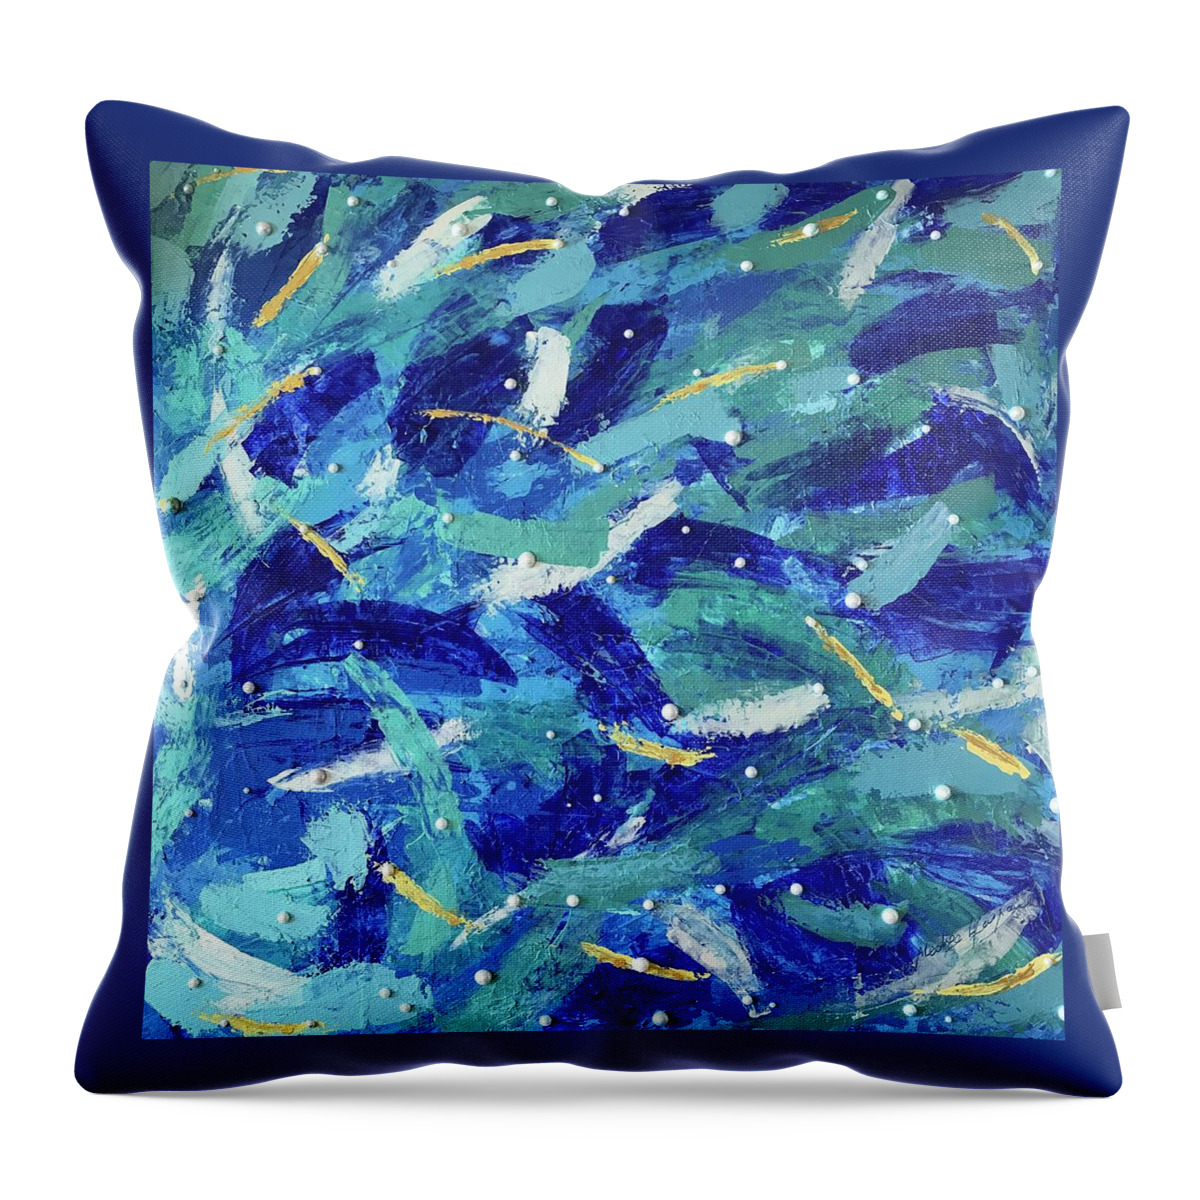 Abstract Art Throw Pillow featuring the mixed media Les Michaels by Medge Jaspan